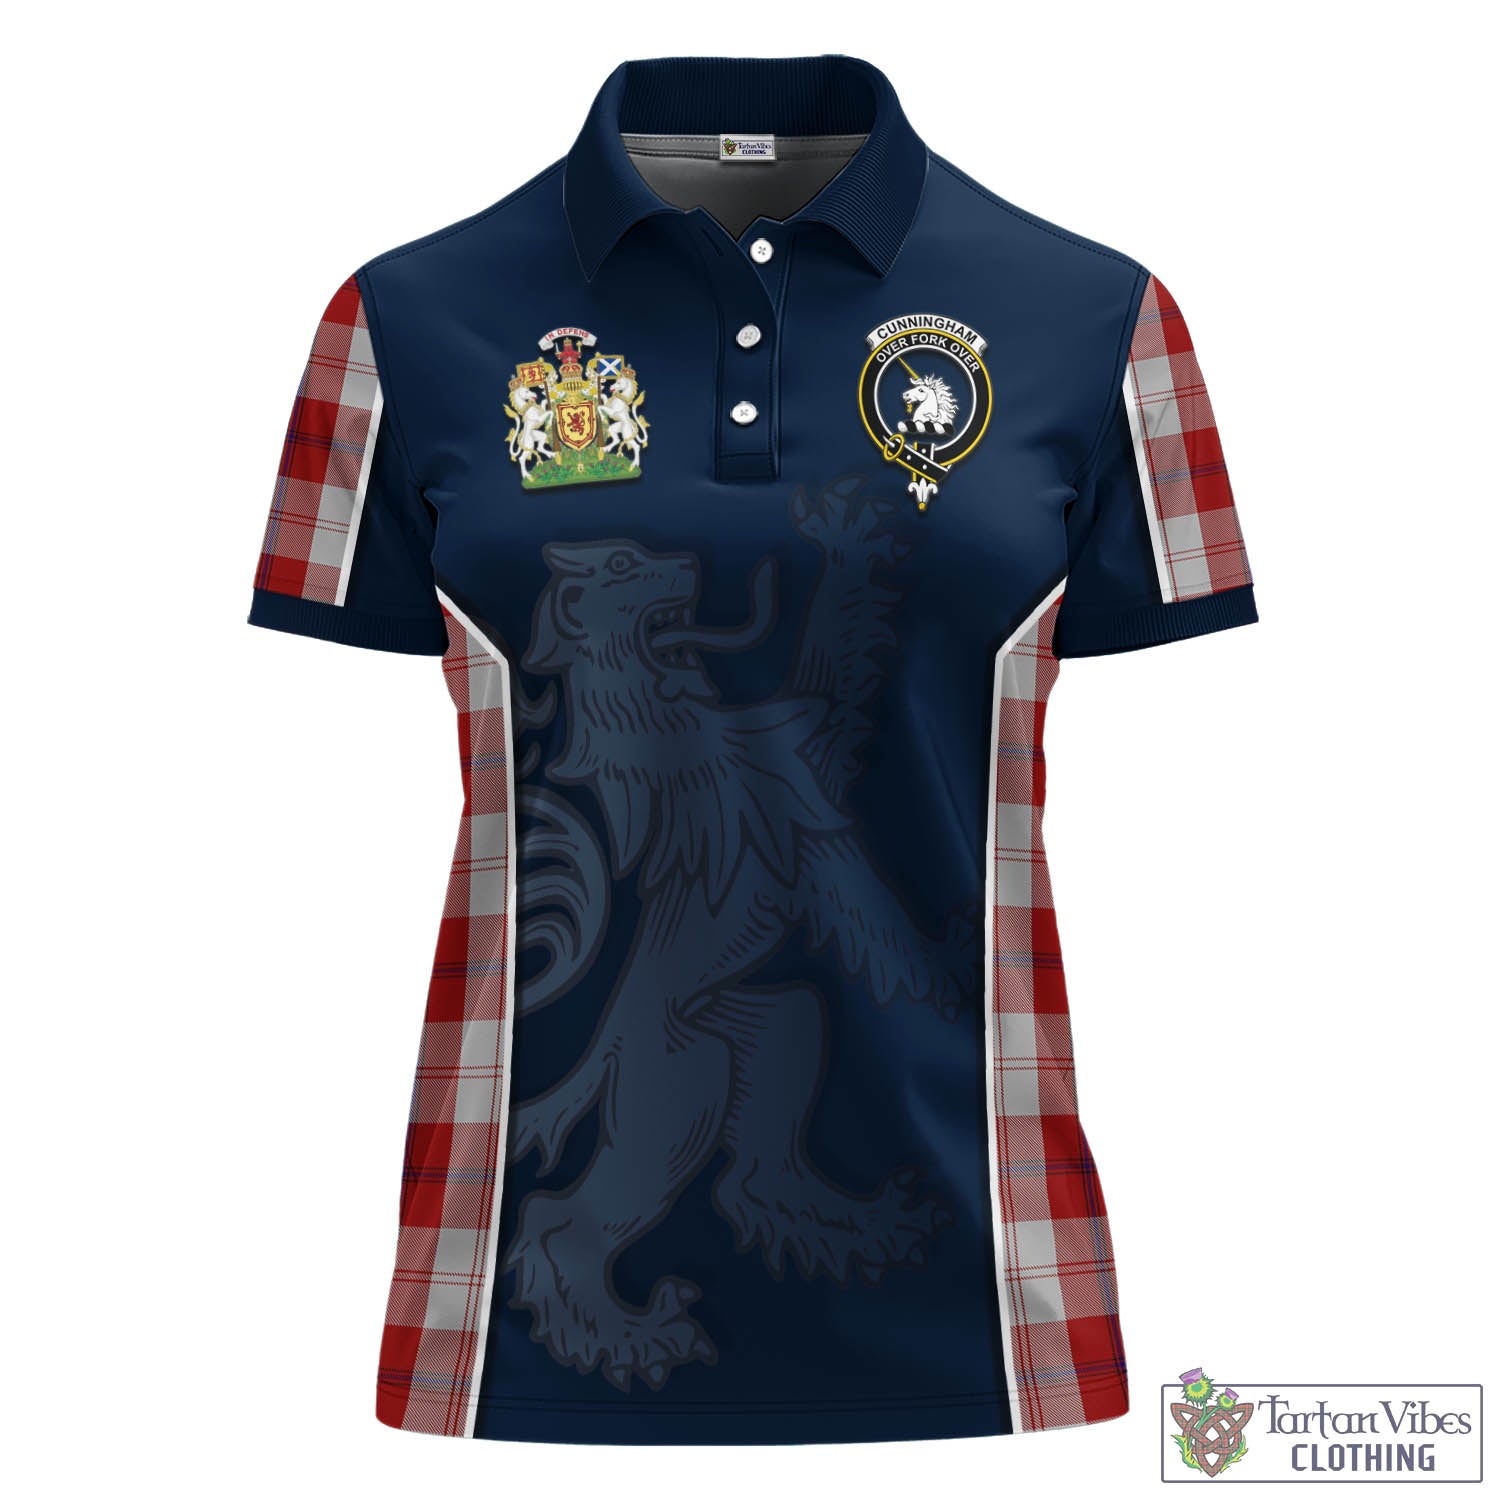 Tartan Vibes Clothing Cunningham Dress Tartan Women's Polo Shirt with Family Crest and Lion Rampant Vibes Sport Style